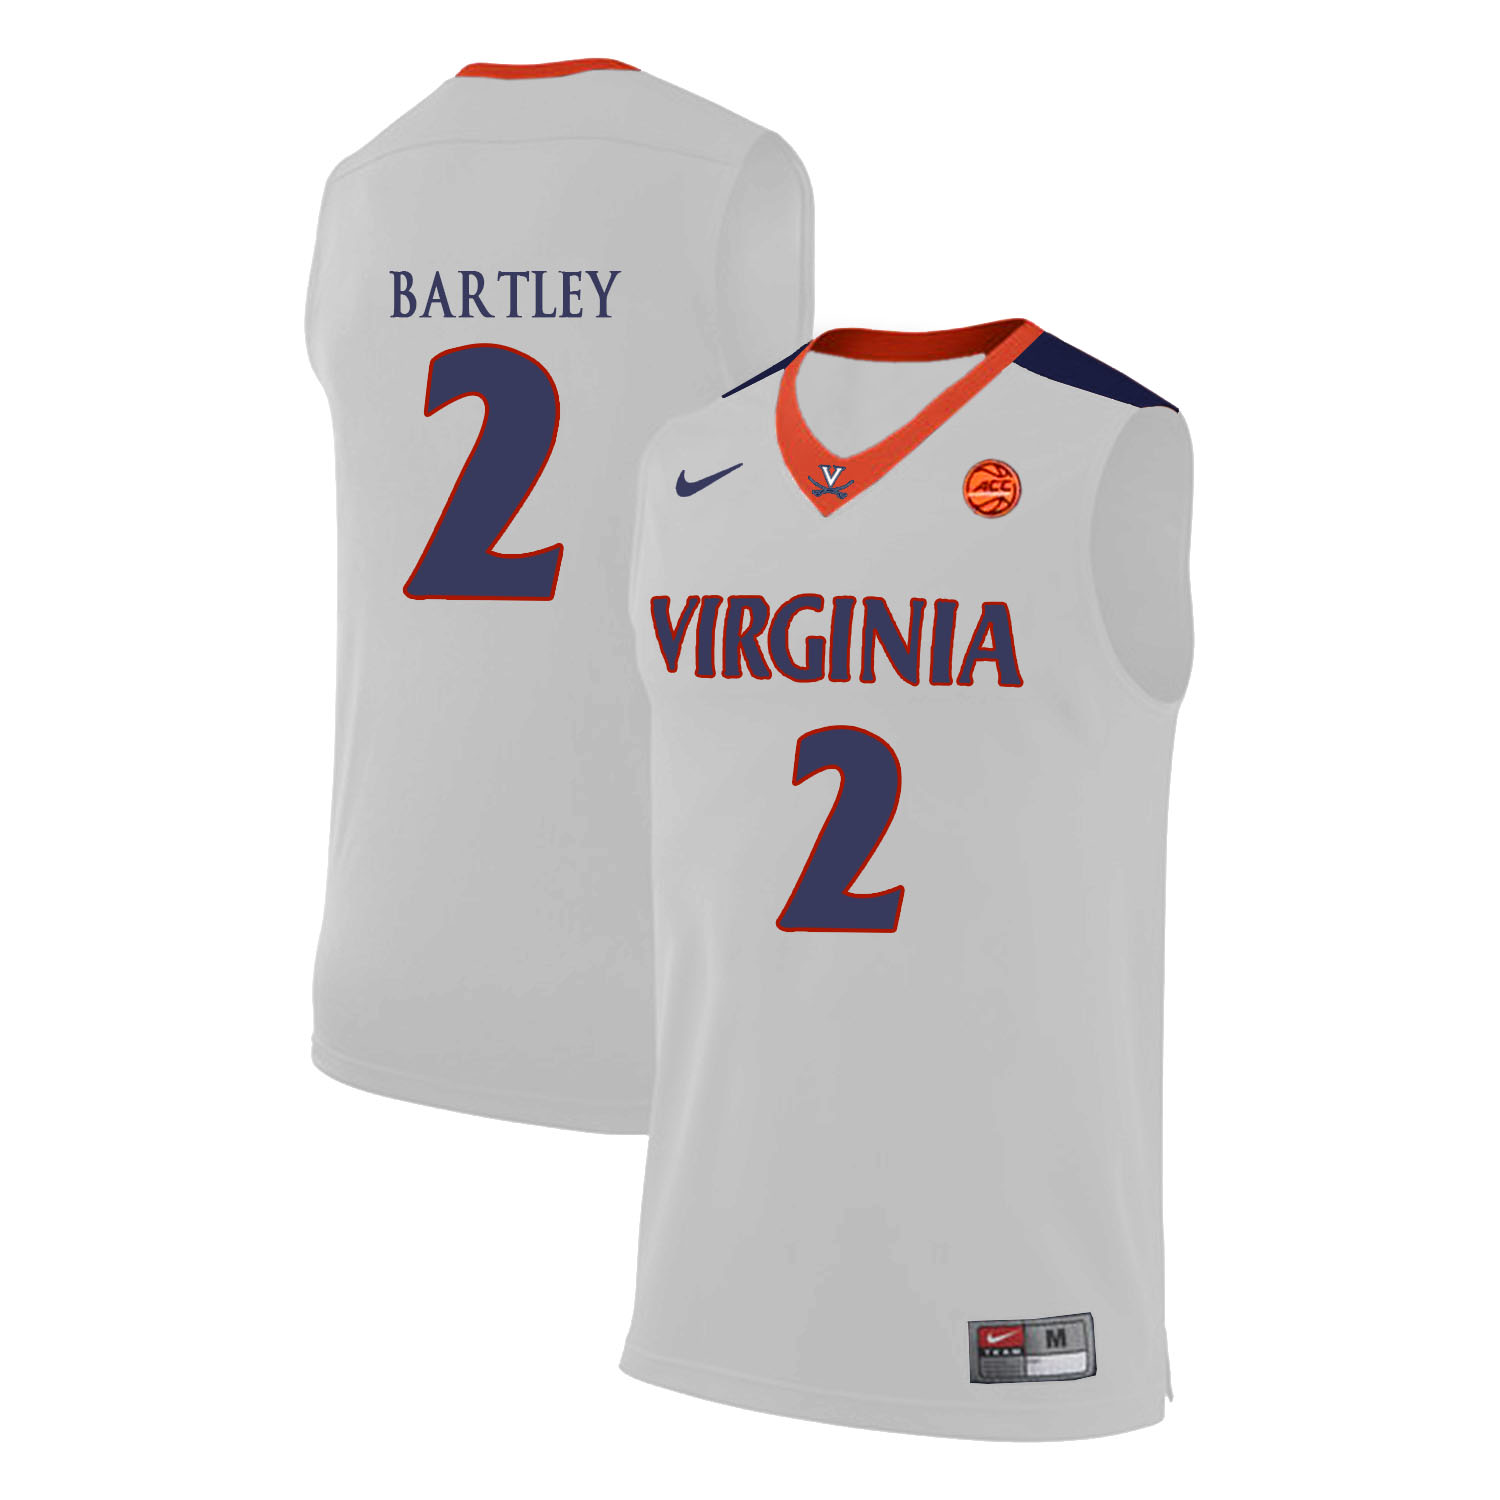 Virginia Cavaliers 2 Justice Bartley White College Basketball Jersey